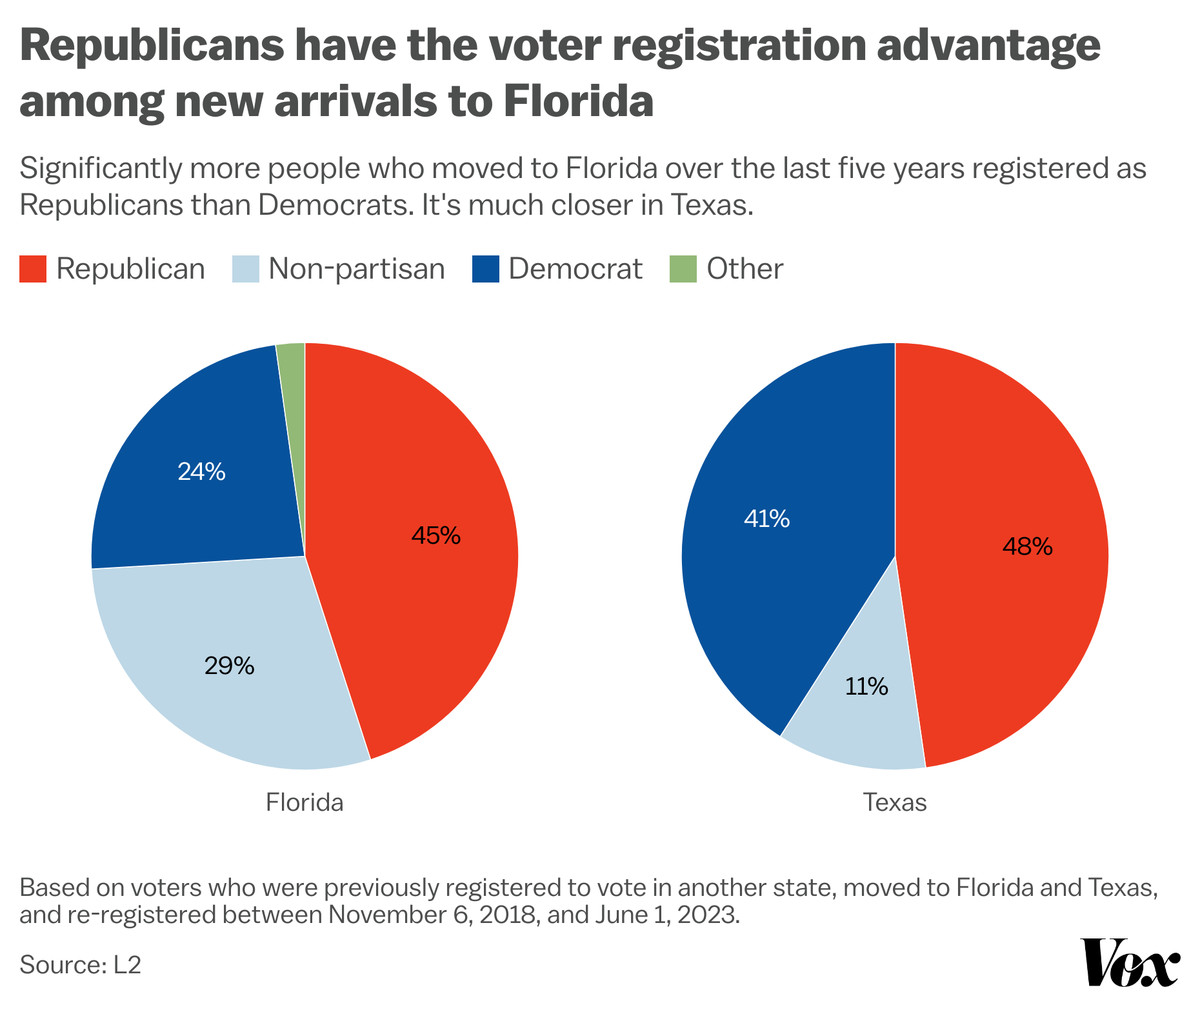 Two pie charts sit side-by-side under the title “Republicans have the voter registration advantage among new arrivals to Florida.” The one on the left, labeled “Florida,” shows 45 percent of new voters registered with the GOP, 29 percent as nonpartisan, 24 percent as Democrat, and the remainder as other. The one on the right, labeled “Texas,” shows 48 percent of new voters registered as Republican, 11 percent as nonpartisan, and 41 percent as Democrats.